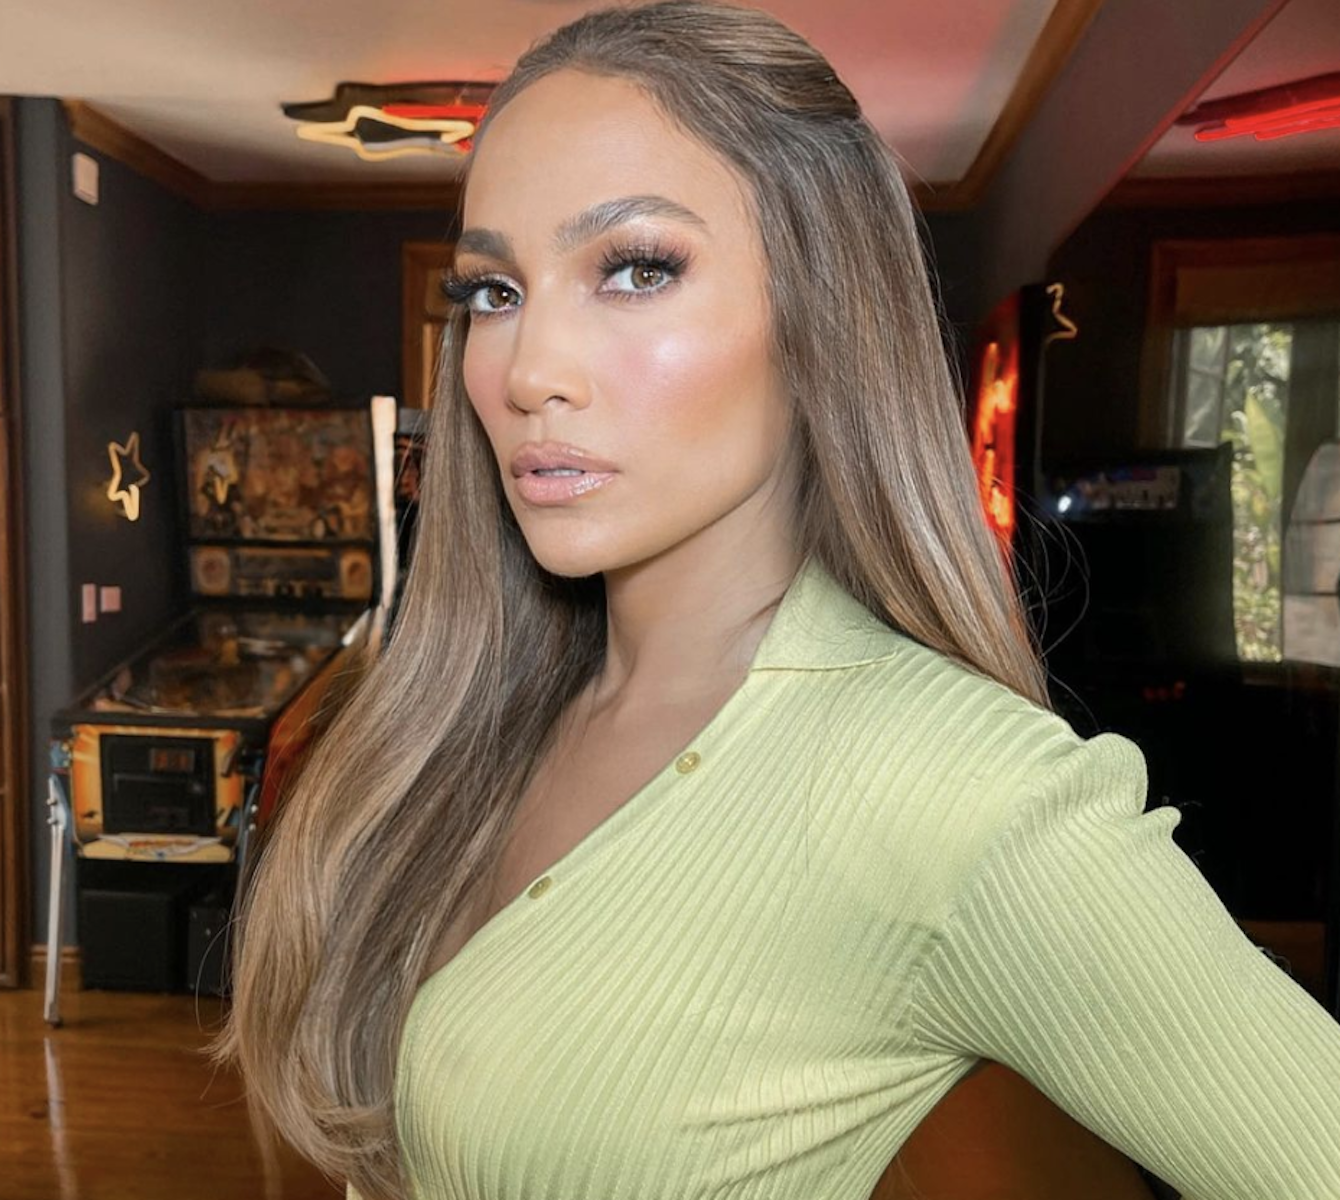 The JLo Inspired ‘Touch Of Toffee’ Hair Trend Perfect For Fall